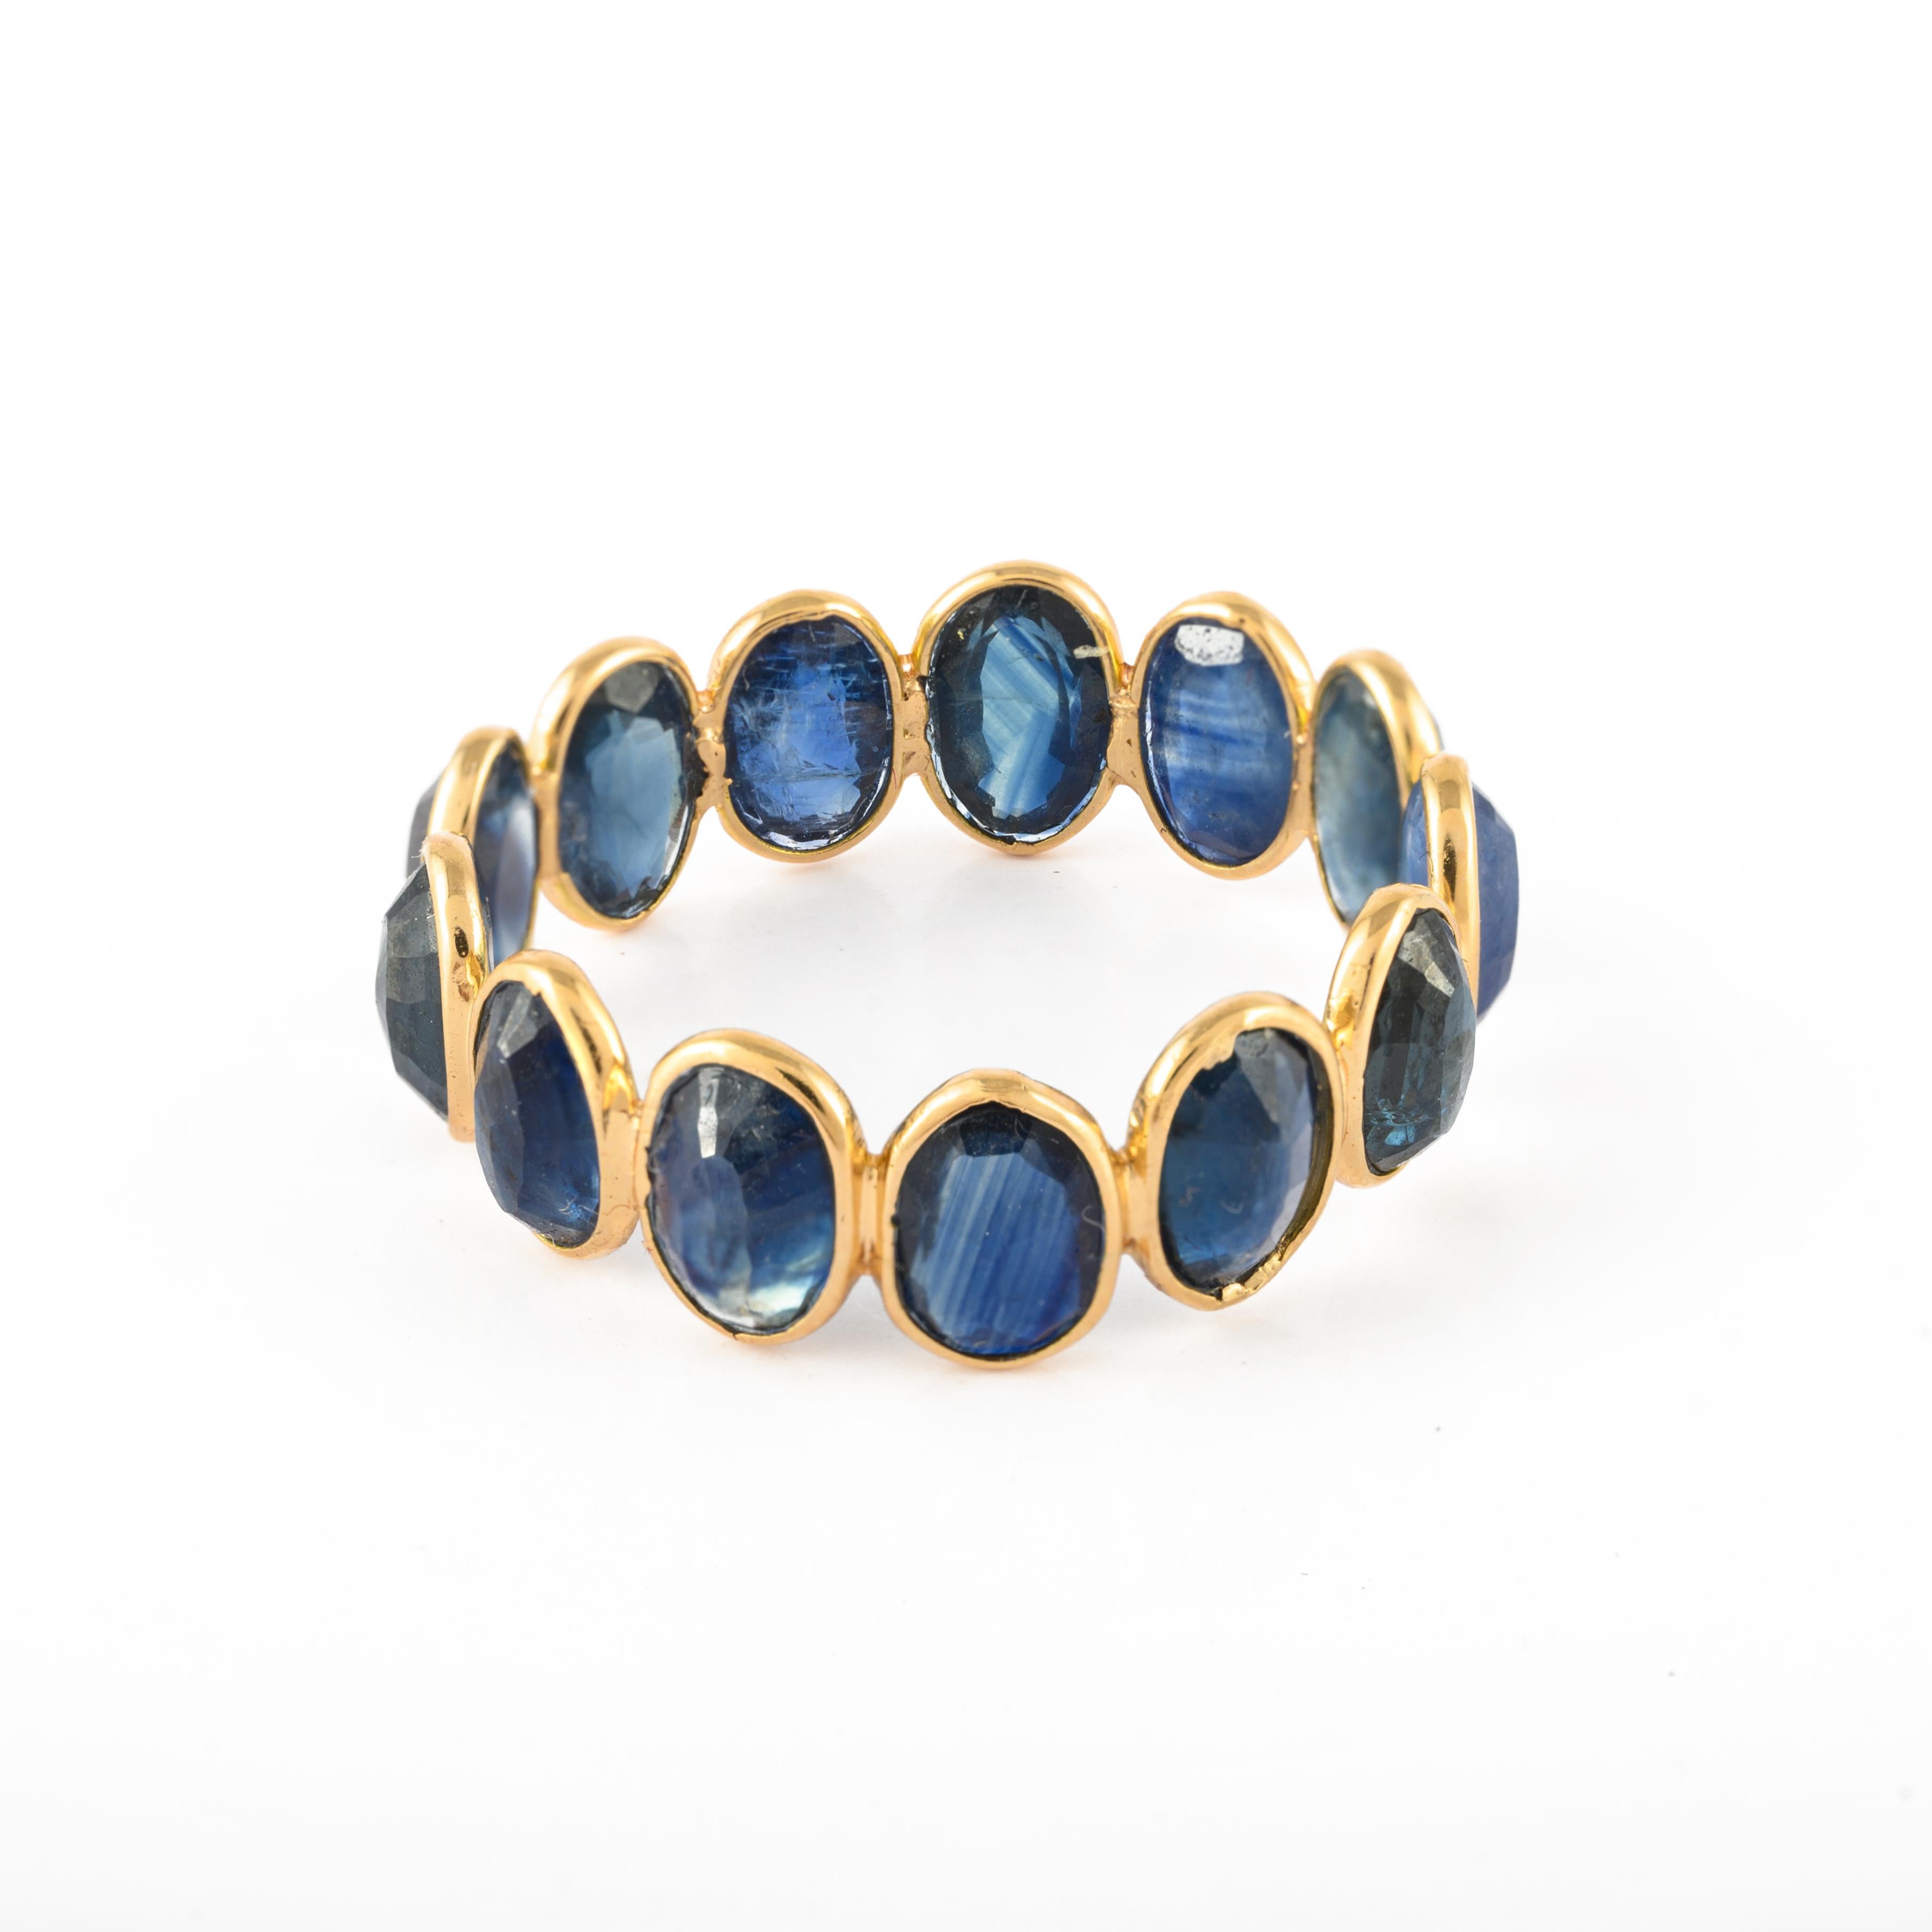 For Sale:  7.8 Carat Continual Oval Blue Sapphire Eternity Band Ring in 18k Yellow Gold 5